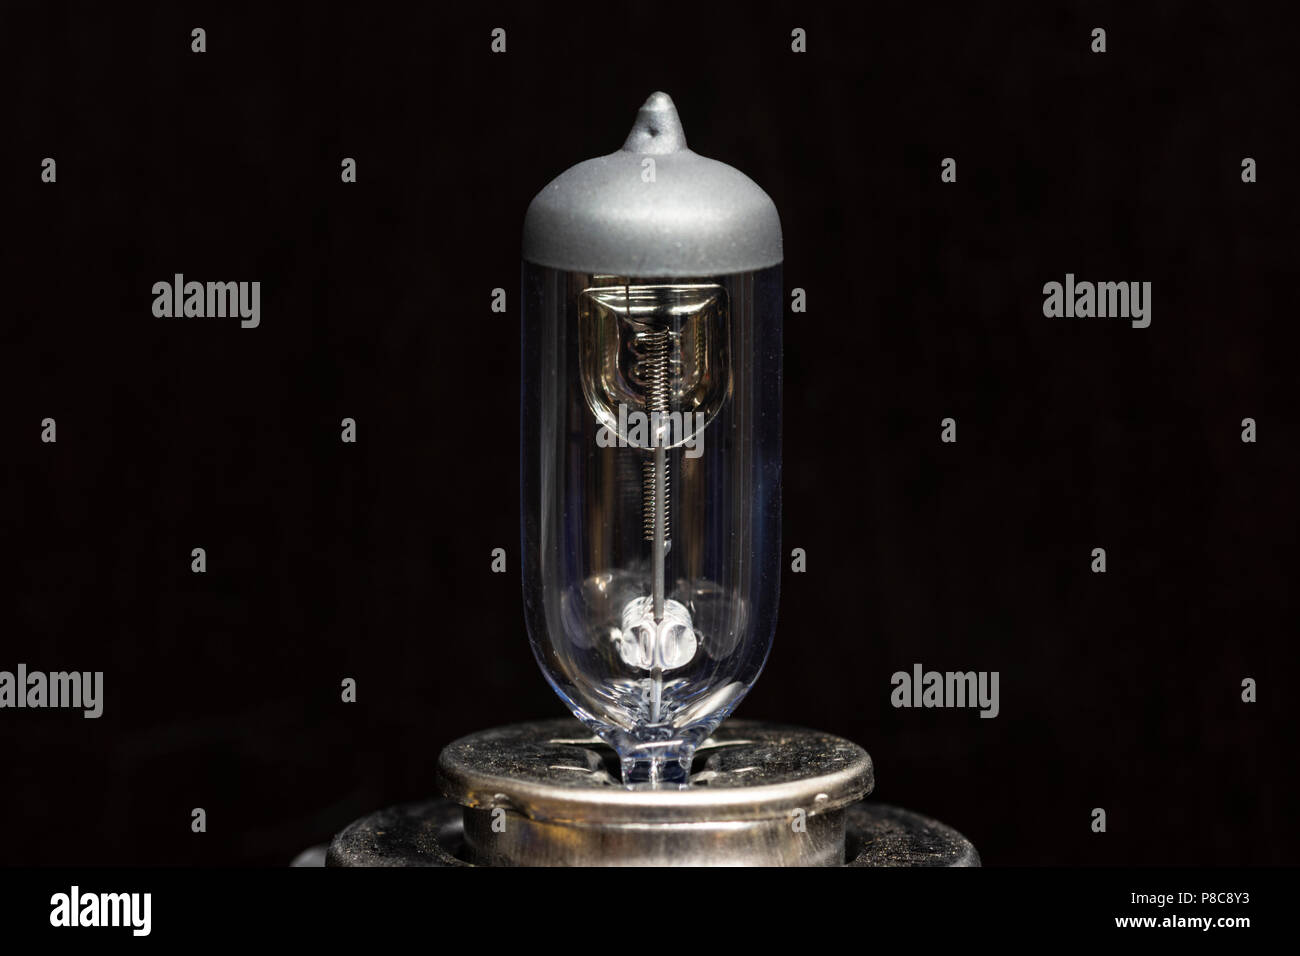 Close up of a motor vehicle halogen light bulb. isolated on a black background. Stock Photo